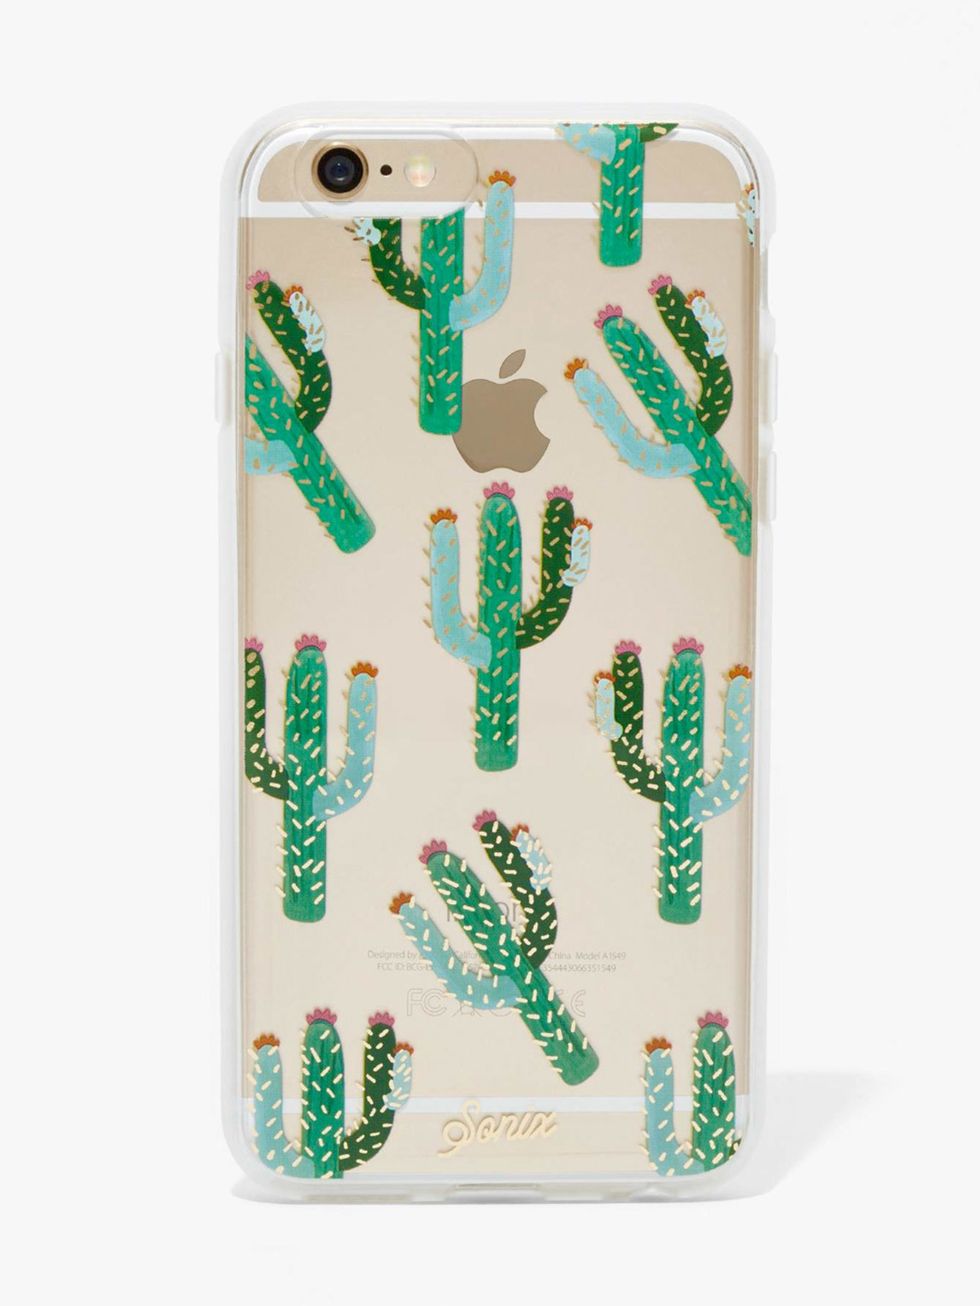 Green, Teal, Musical instrument accessory, Turquoise, Aqua, Mobile phone case, Pattern, Mobile phone accessories, Rectangle, Metal, 